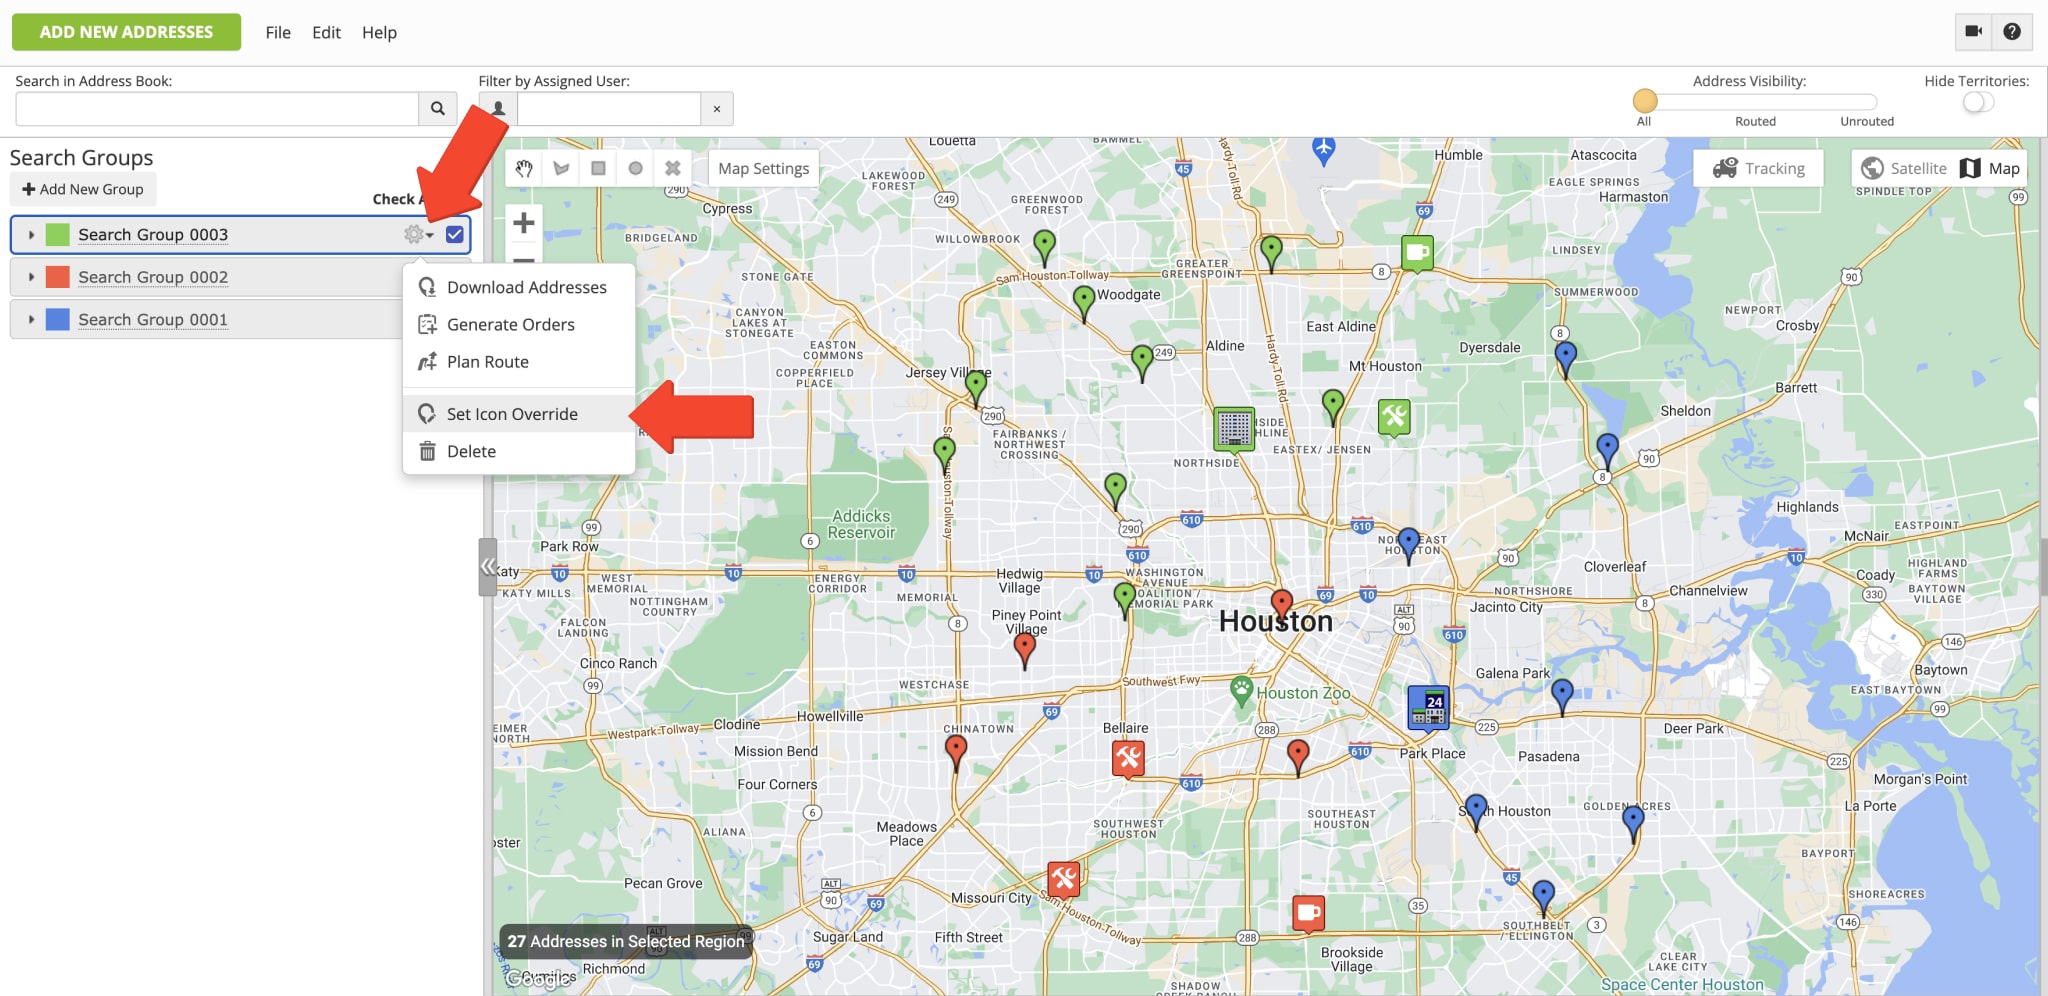 Set icon override for the addresses and customer locations filtered on the Address Book Map.